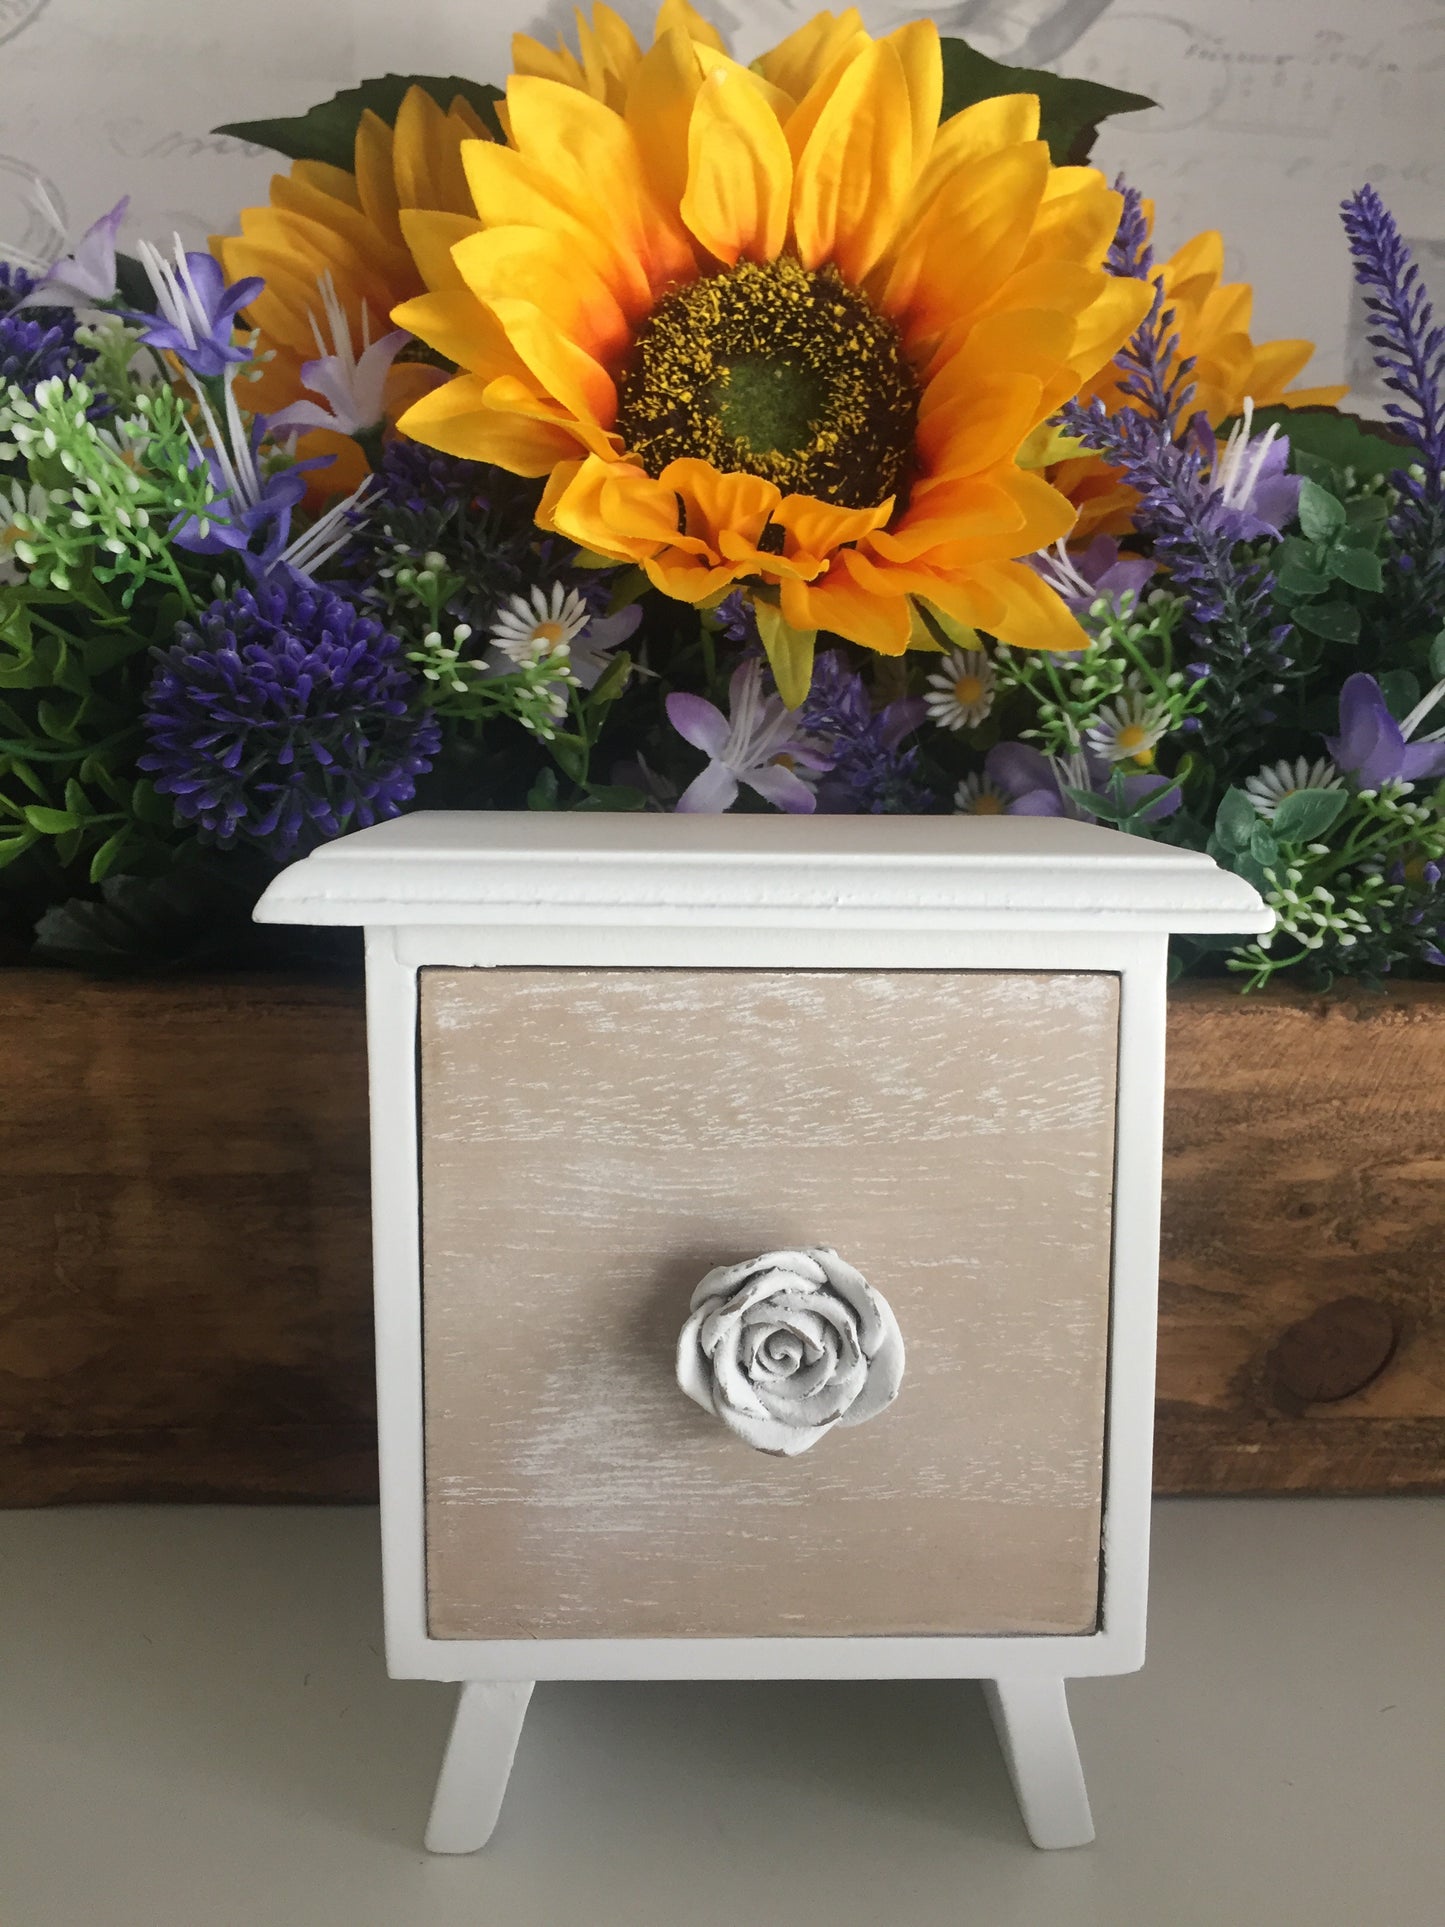 Single drawer mini chest with rose handle